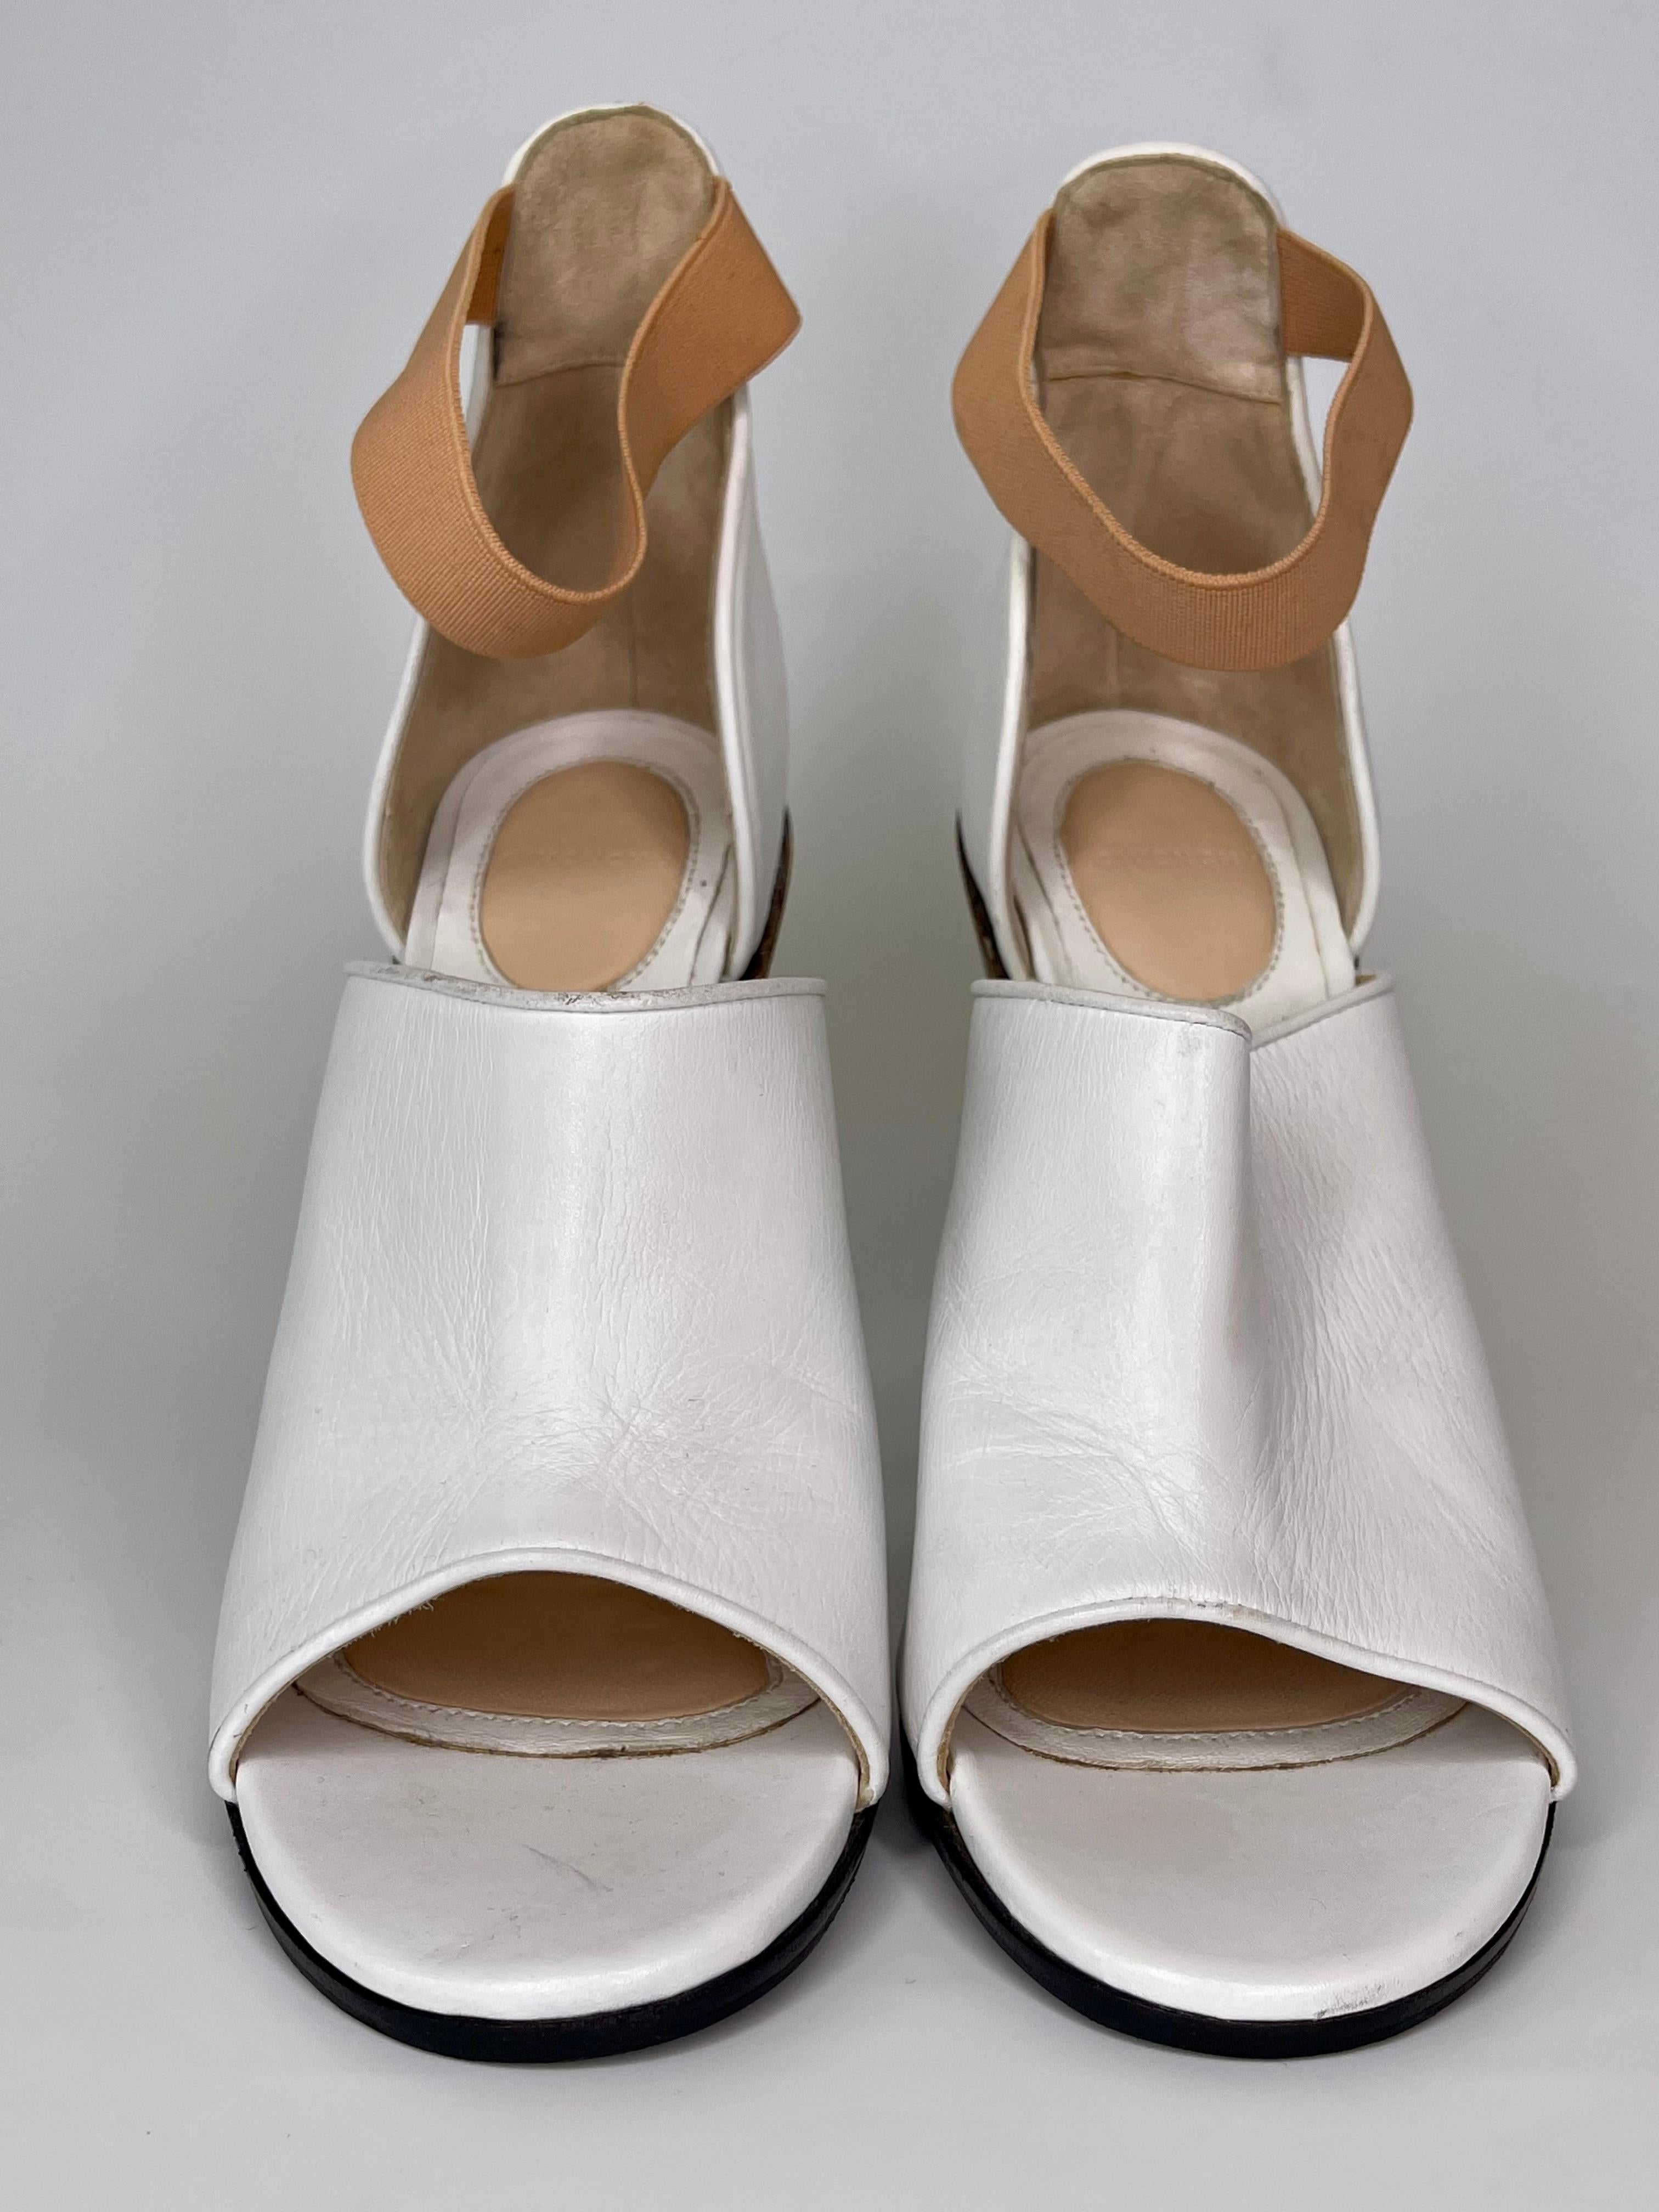 From the 2013 Collection, this Givenchy Open Toe Heel features a wooden conical heel with gold finishing and a white leather upper studded at the bottom. The shoe is held in place on the foot by a blush color strap. 

COLOR: White
MATERIAL: Leather